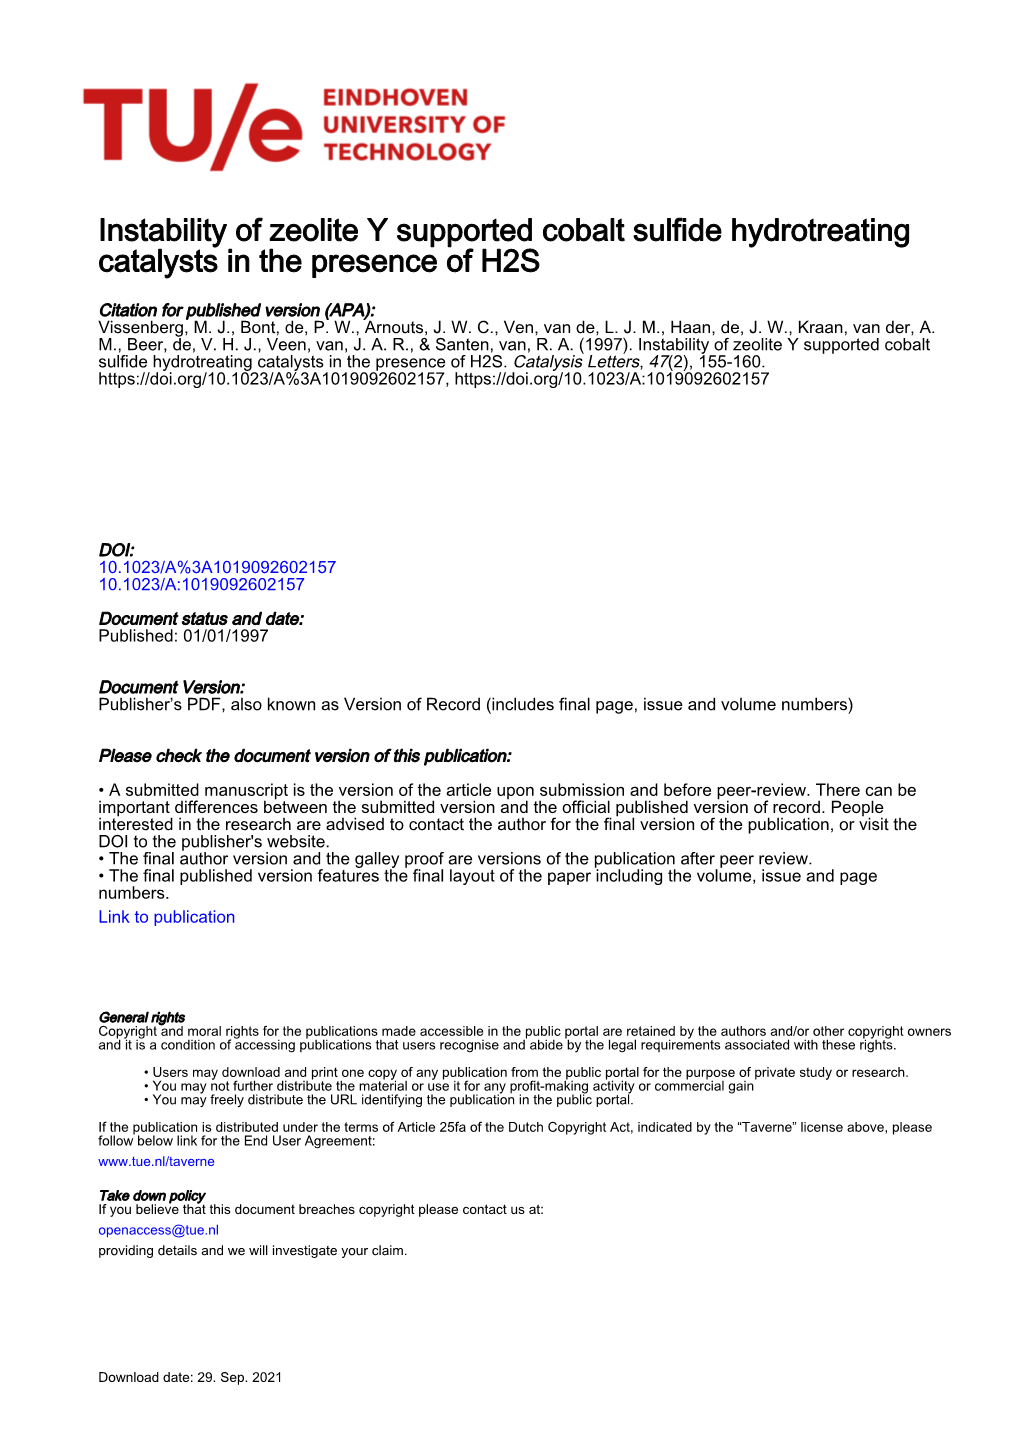 Instability of Zeolite Y Supported Cobalt Sulfide Hydrotreating Catalysts in the Presence of H2S